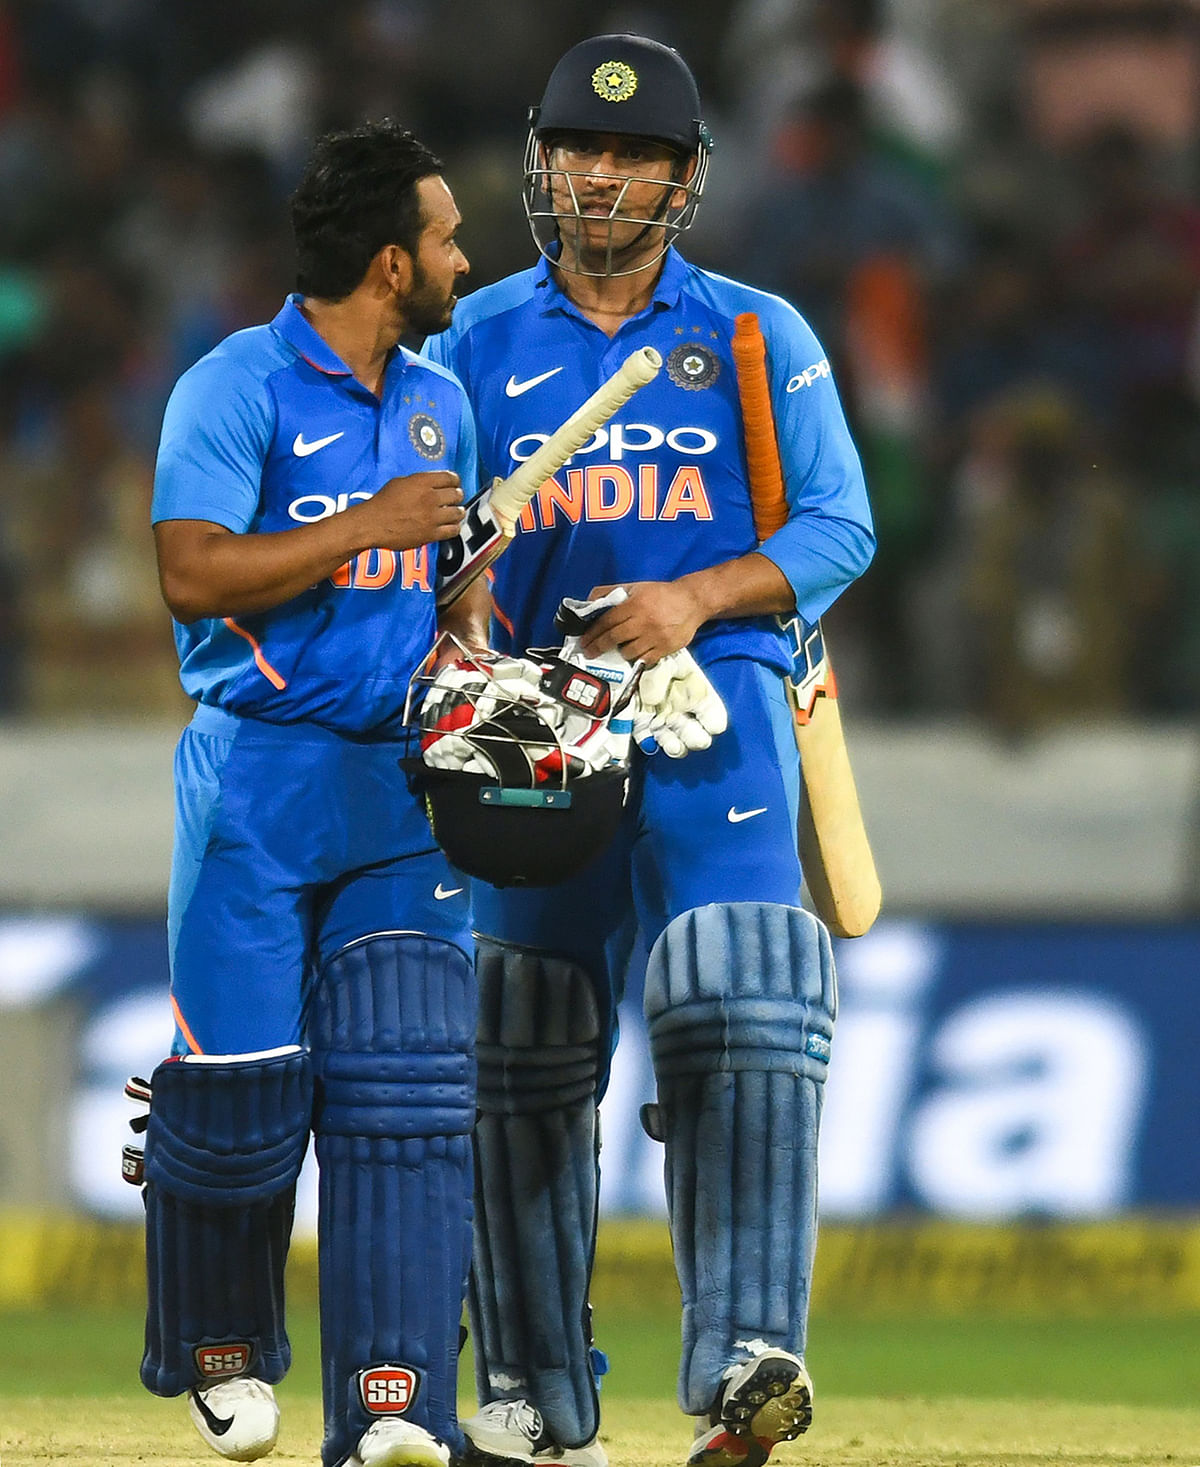 Indian cricketer Mahendra Singh Dhoni (R) and Kedar Jadhav (L) react as they walk out of the field after winning the first one day international (ODI) cricket match between India and Australia at the Rajiv Gandhi International Cricket Stadium in Hyderabad on 2 March, 2019. Photo; AFP